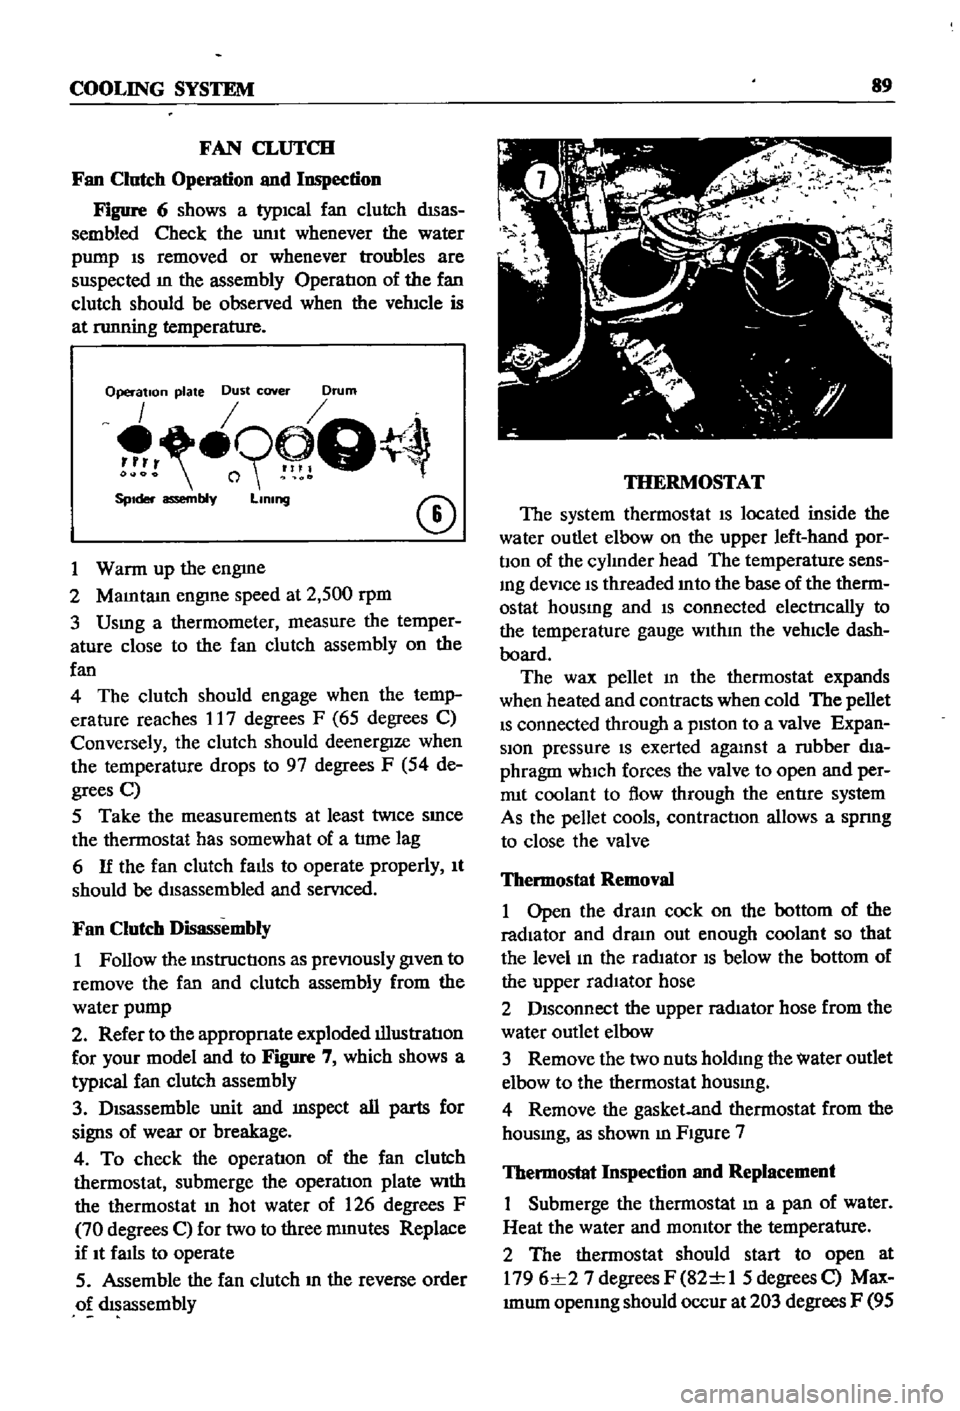 DATSUN 510 1968  Service Repair Manual 
COOLING 
SYSTEM 
89

FAN 
CLUTCH

Fan 
Clutch

Operation 
and

Inspection

Figure 
6 
shows 
a

typICal 
fan 
clutch 
dISas

sembled 
Check 
the 
umt 
whenever 
the 
water

pump 
IS 
removed 
or 
whe